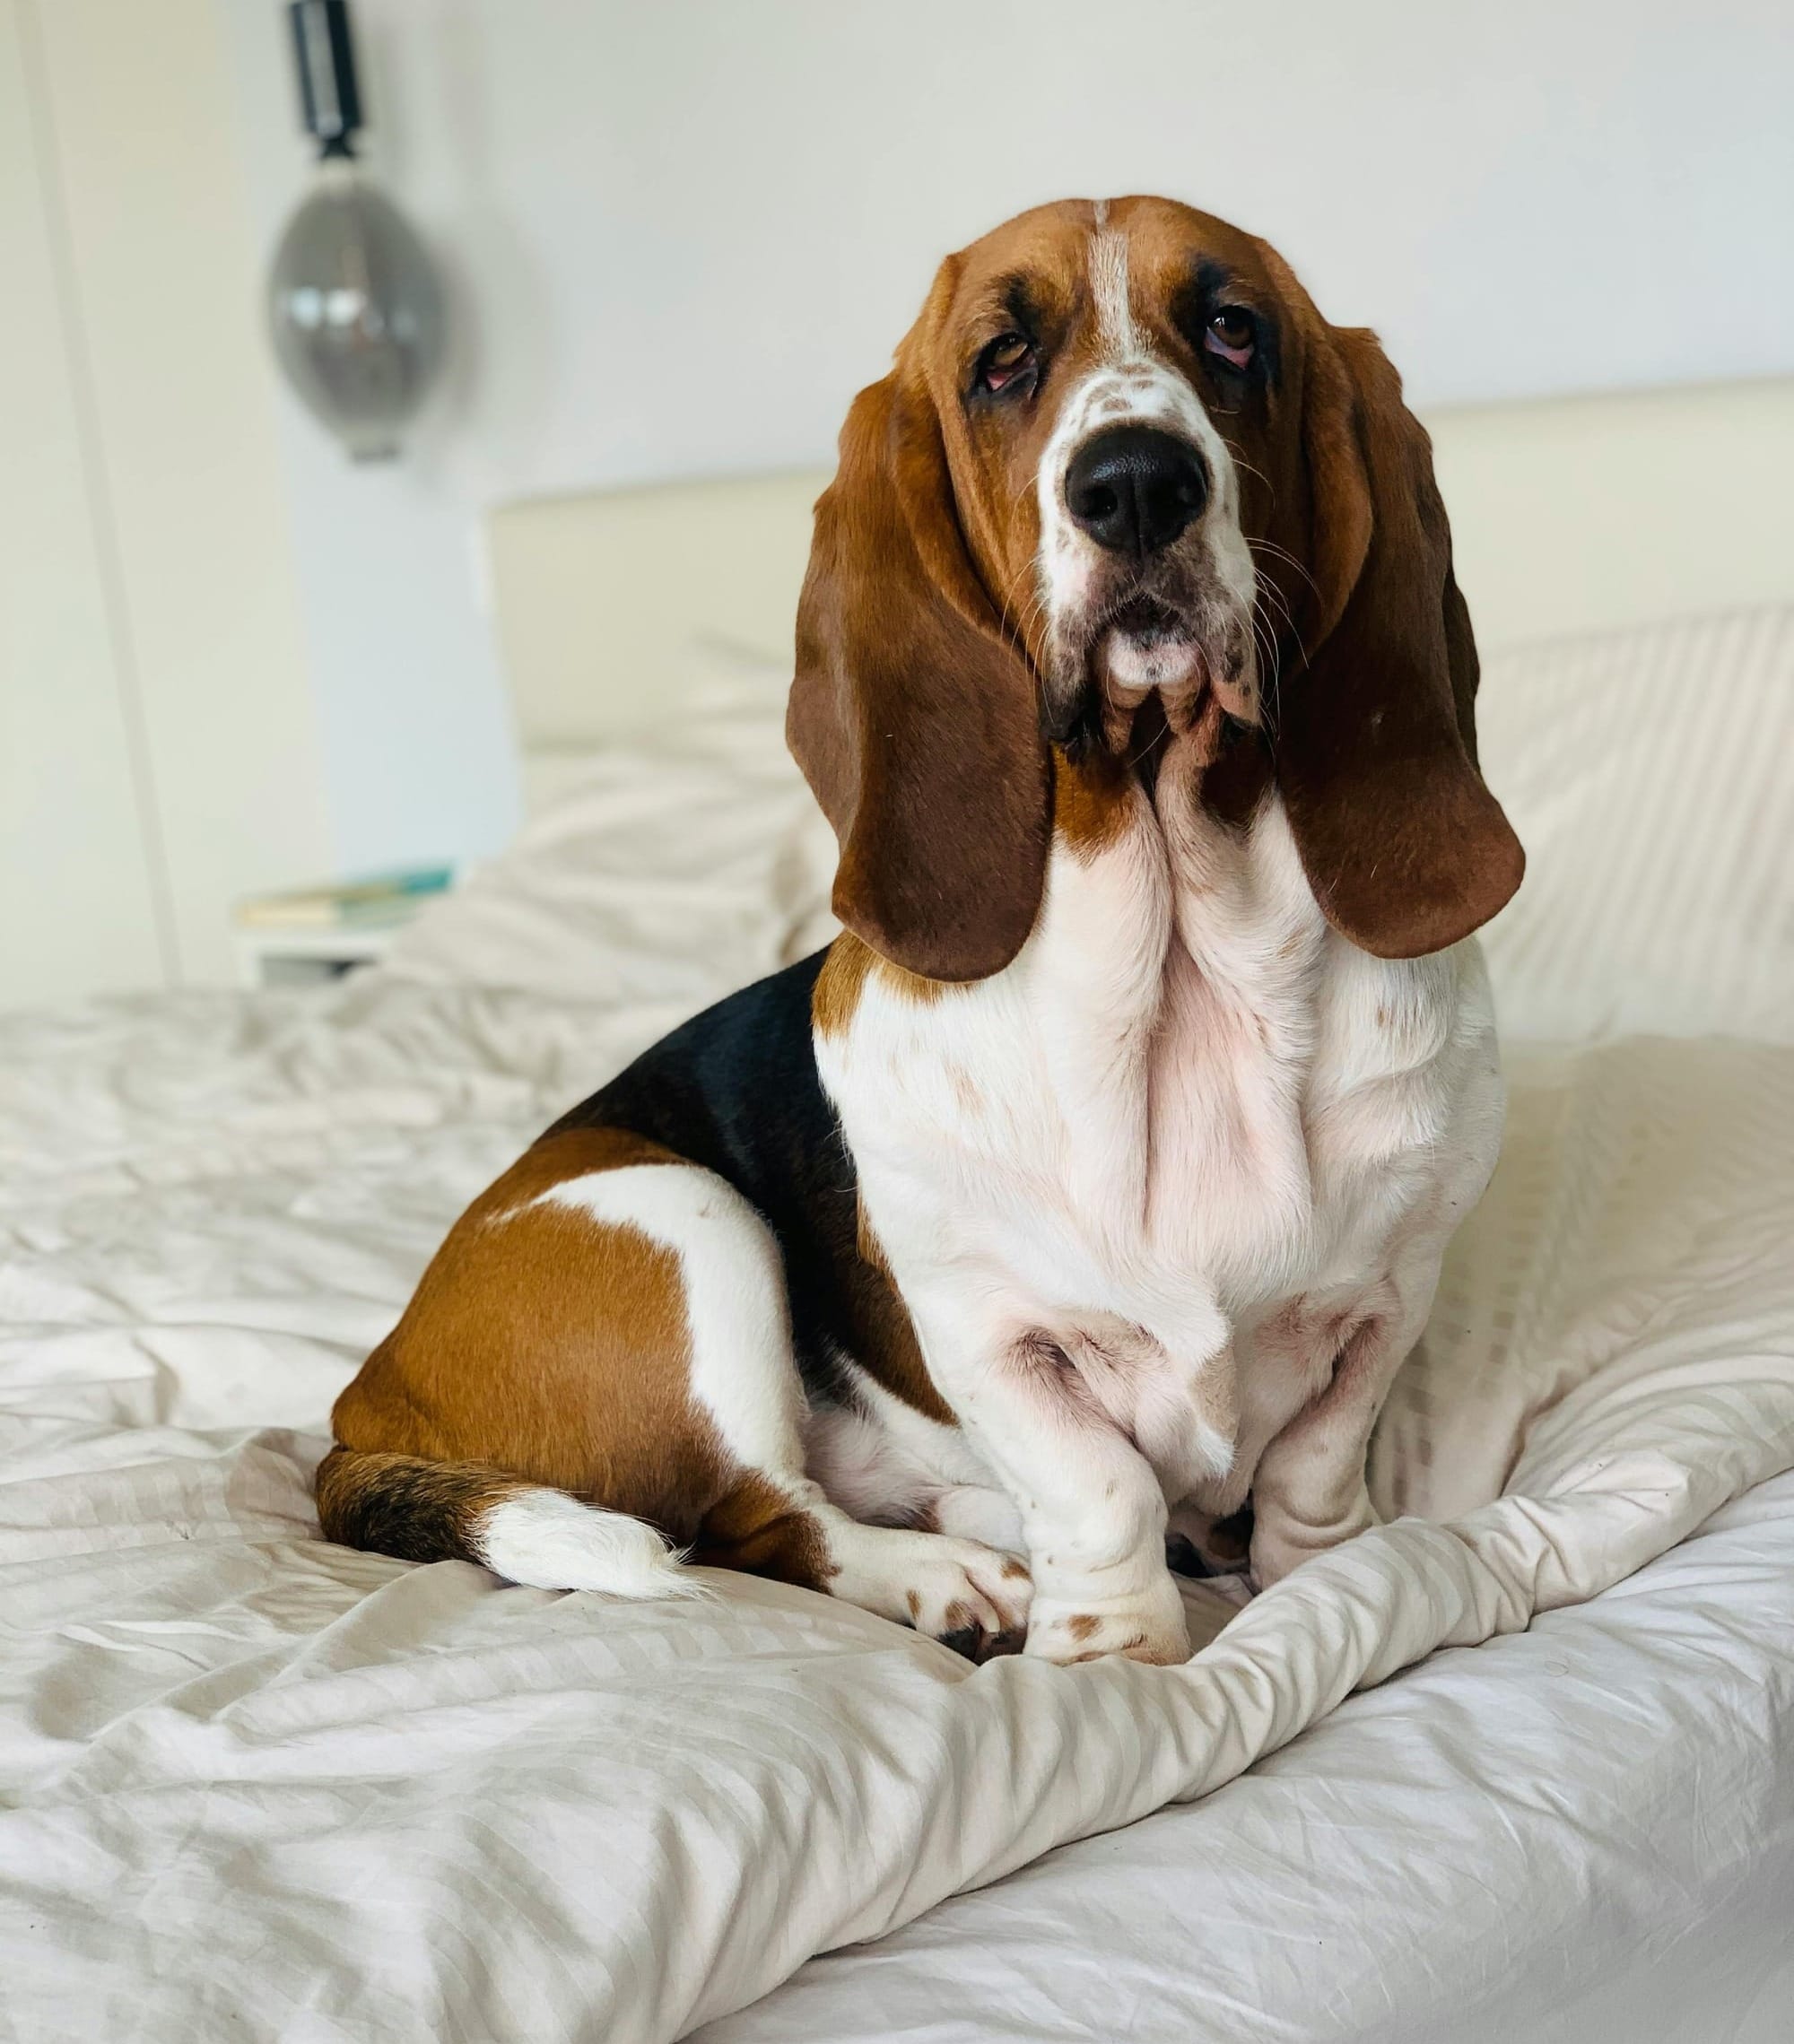 Are Basset Hounds Good Family Dogs